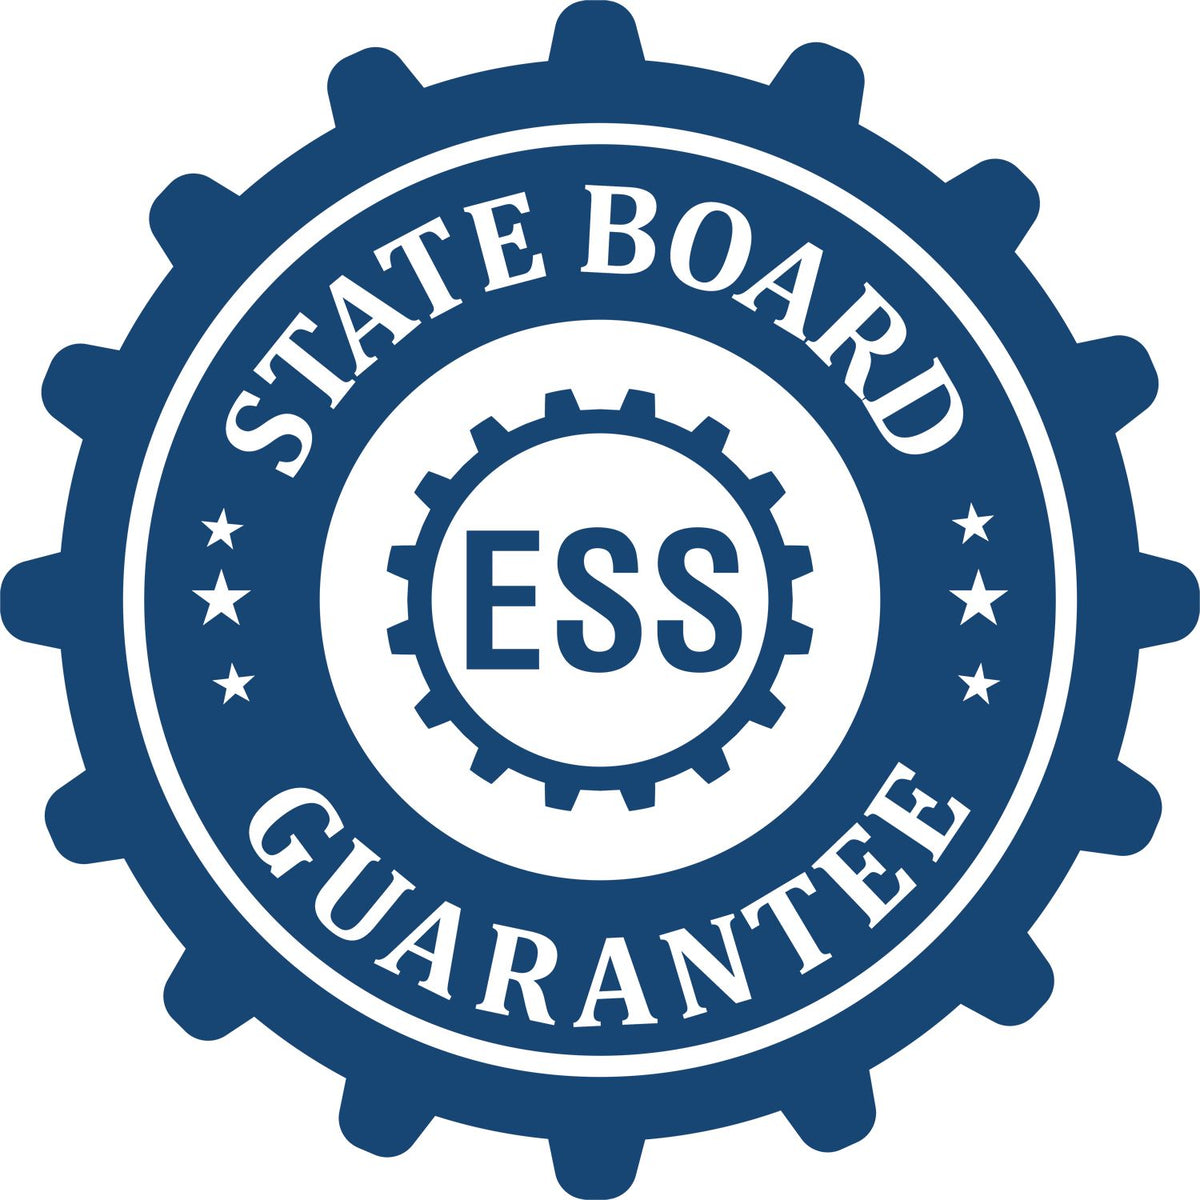 An emblem in a gear shape illustrating a state board guarantee for the Montana Engineer Desk Seal product.